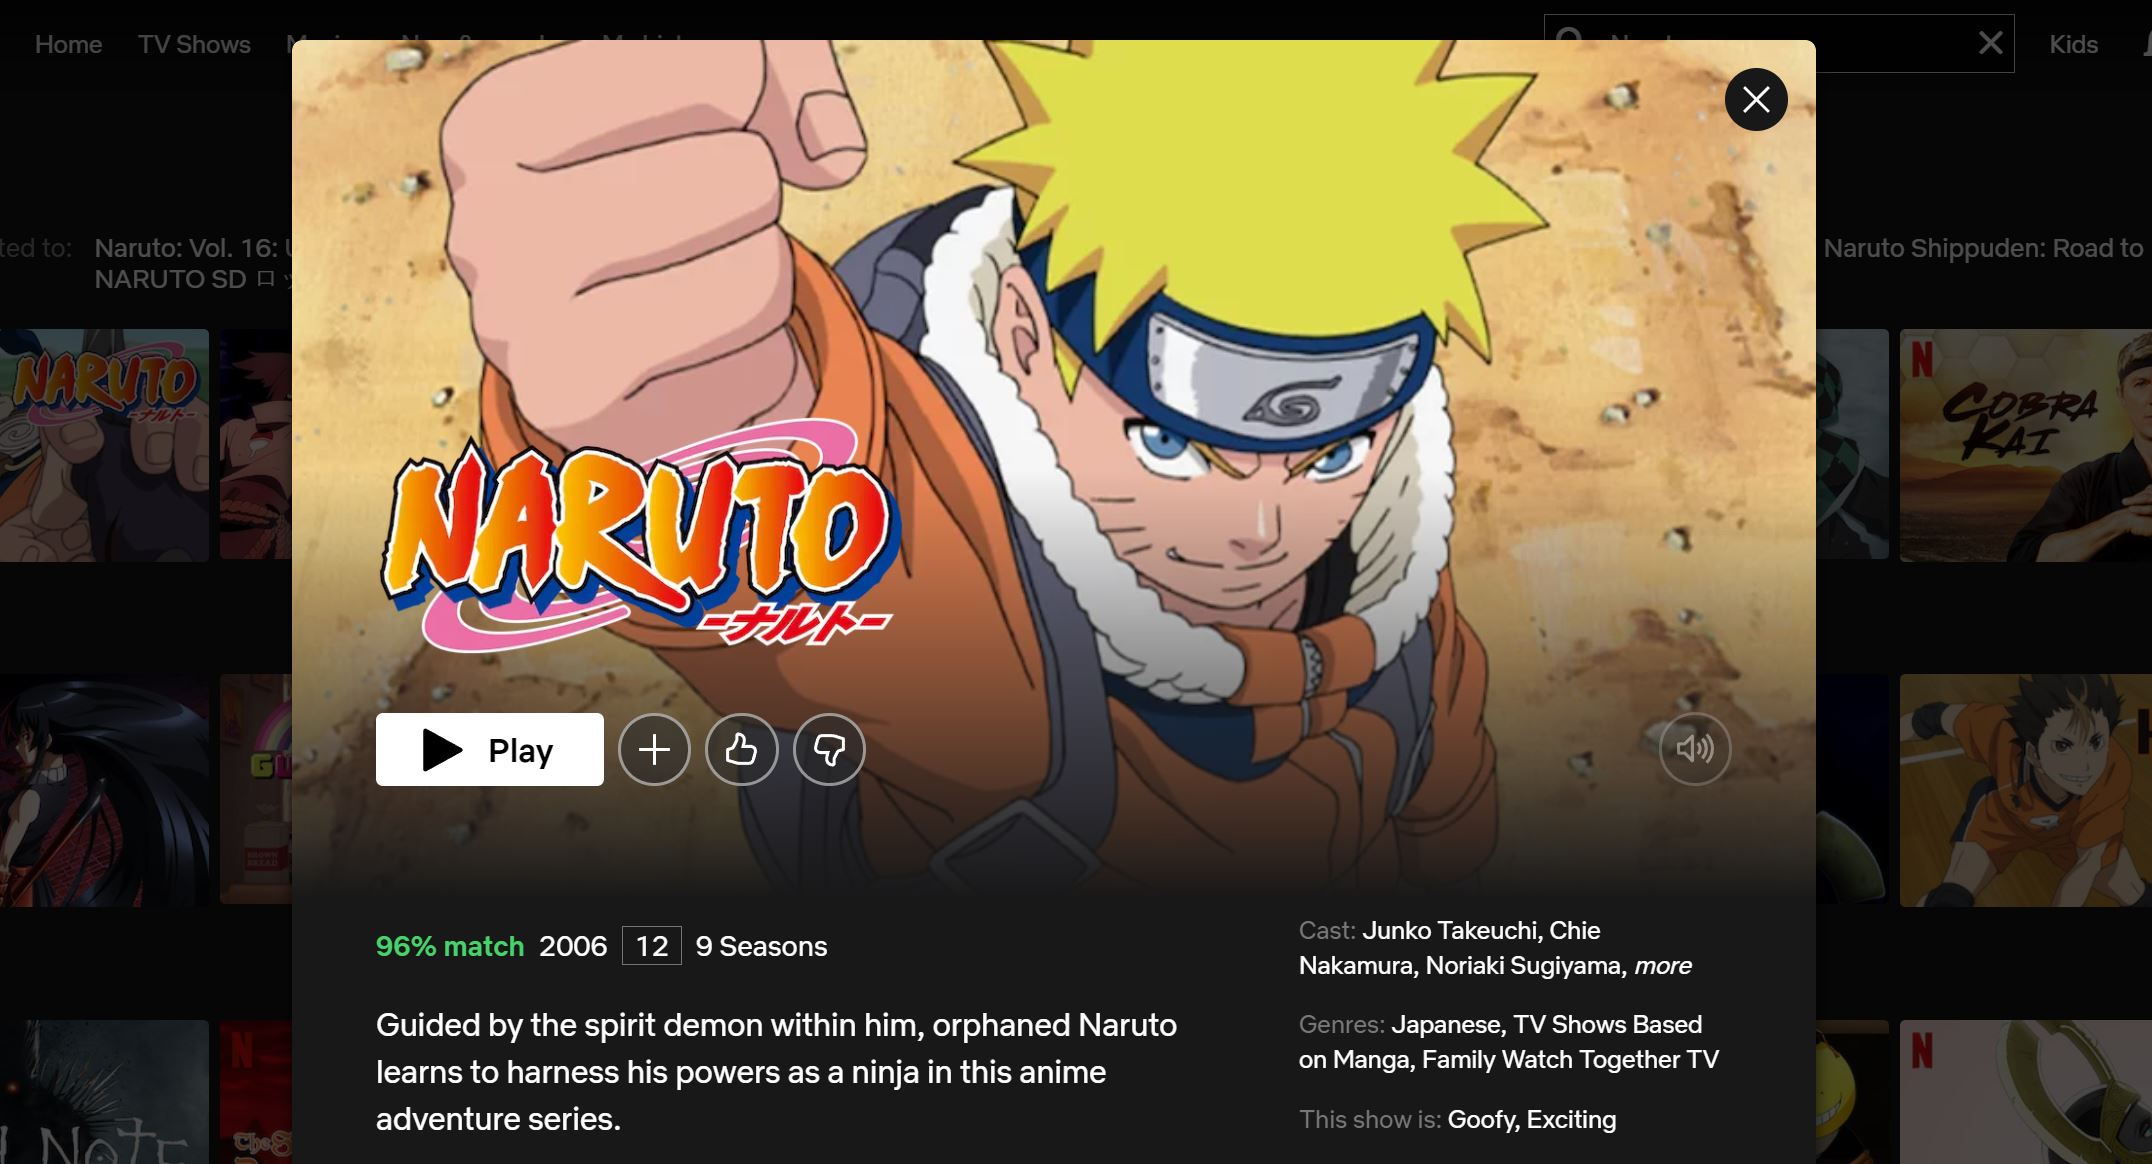 How to watch Naruto on Xbox?